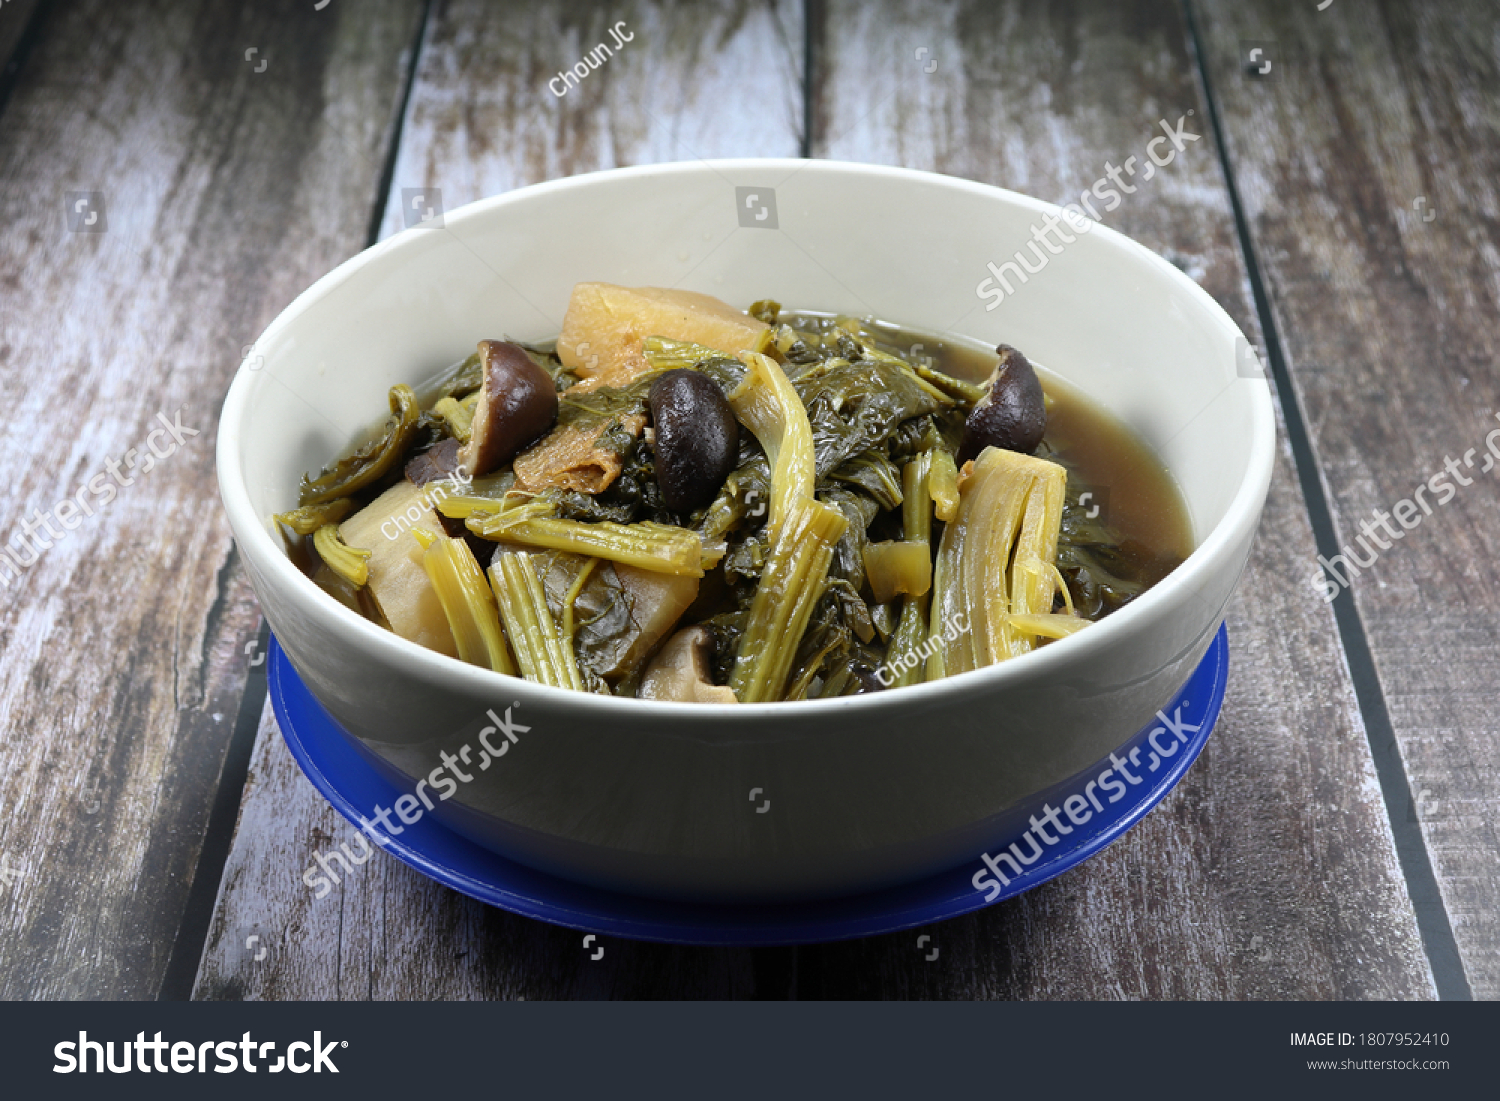 Chinese traditional boiled mix fresh organic vegetable in the bowl, White radish, Cantonese vegetable and cabbage. Famous menu in Chinese New Year and special ancient ceremony. #1807952410